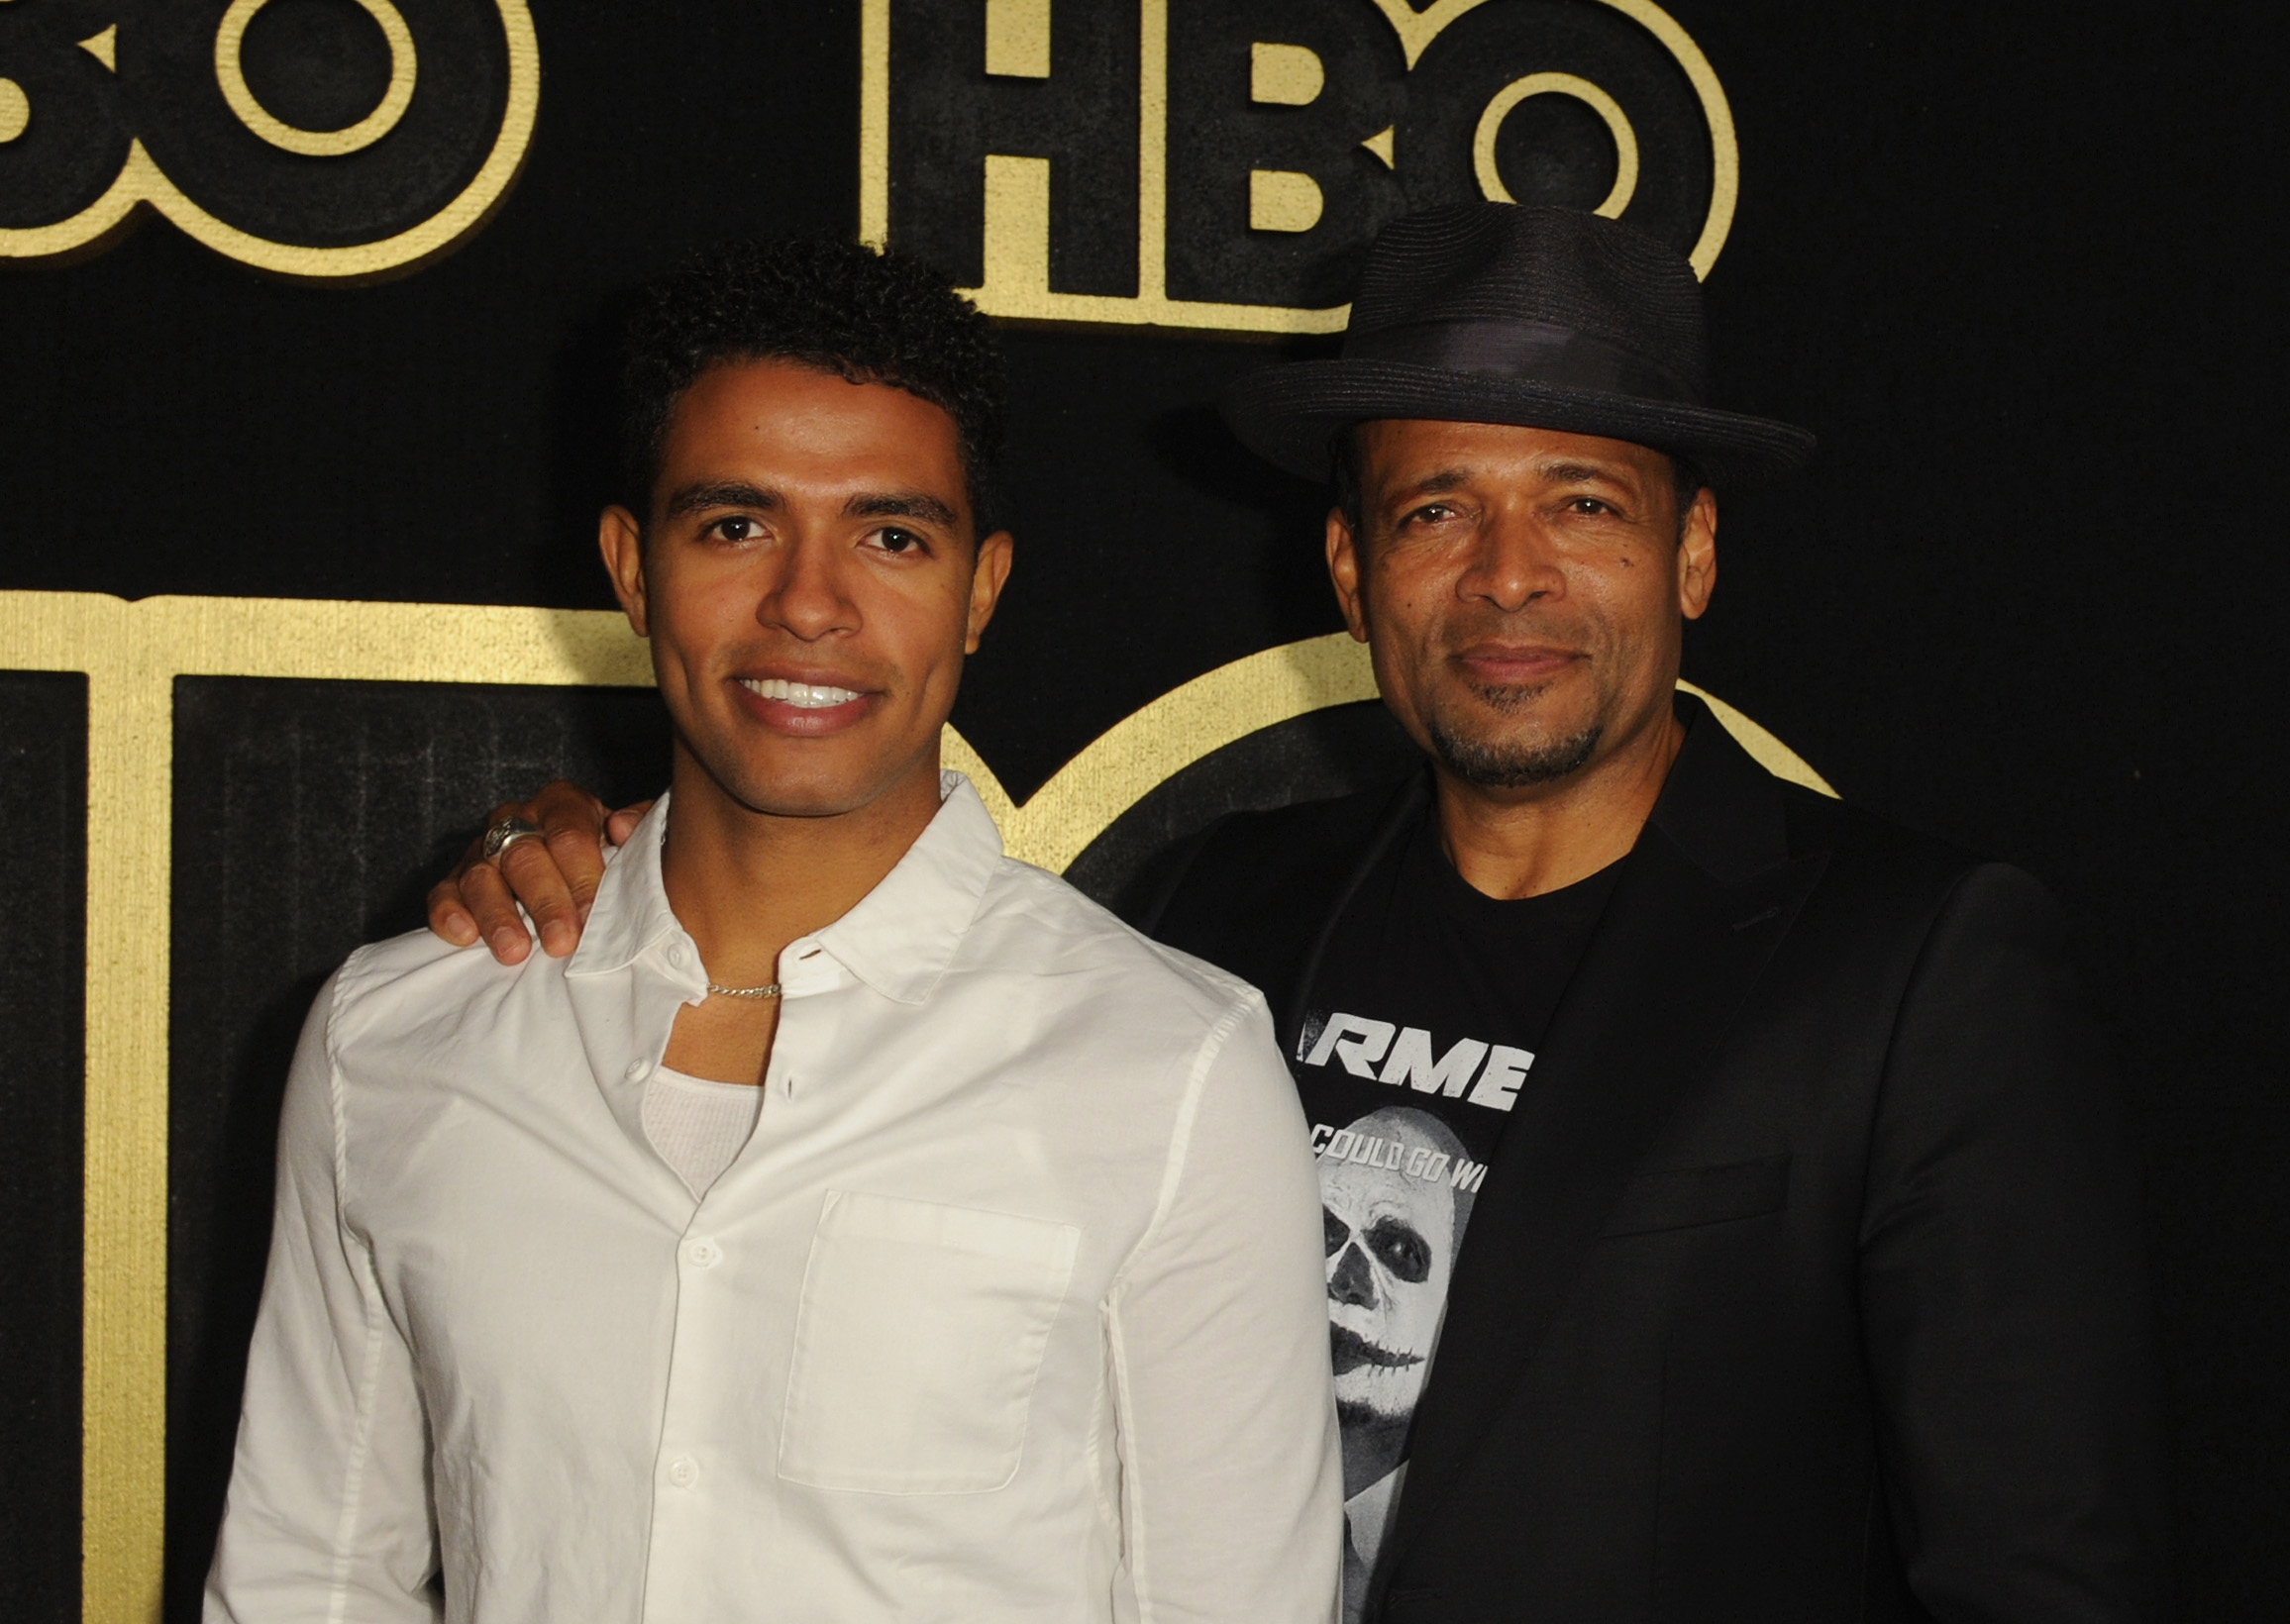 Mandela Van Peebles (L) and Mario Van Peebles arrive at HBO's Official 2018 Emmy After Party on September 17, 2018 in Los Angeles, California. | Source: Getty Images